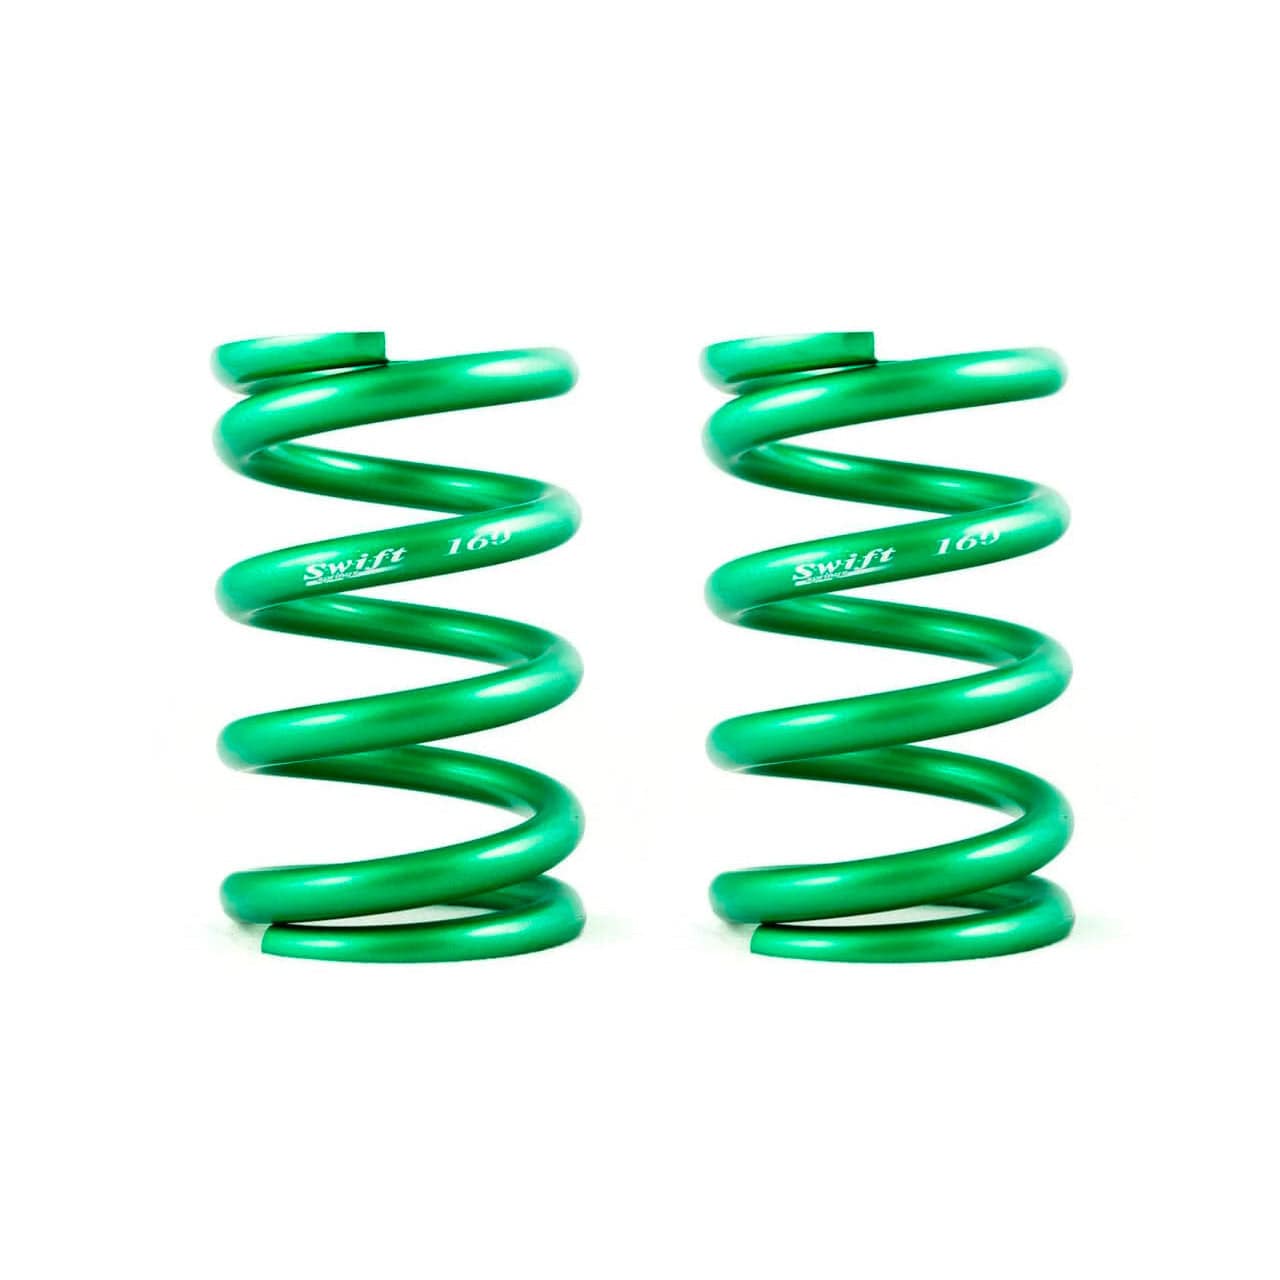 Swift Springs Metric Coilover Springs - ID 70mm, 9" Length